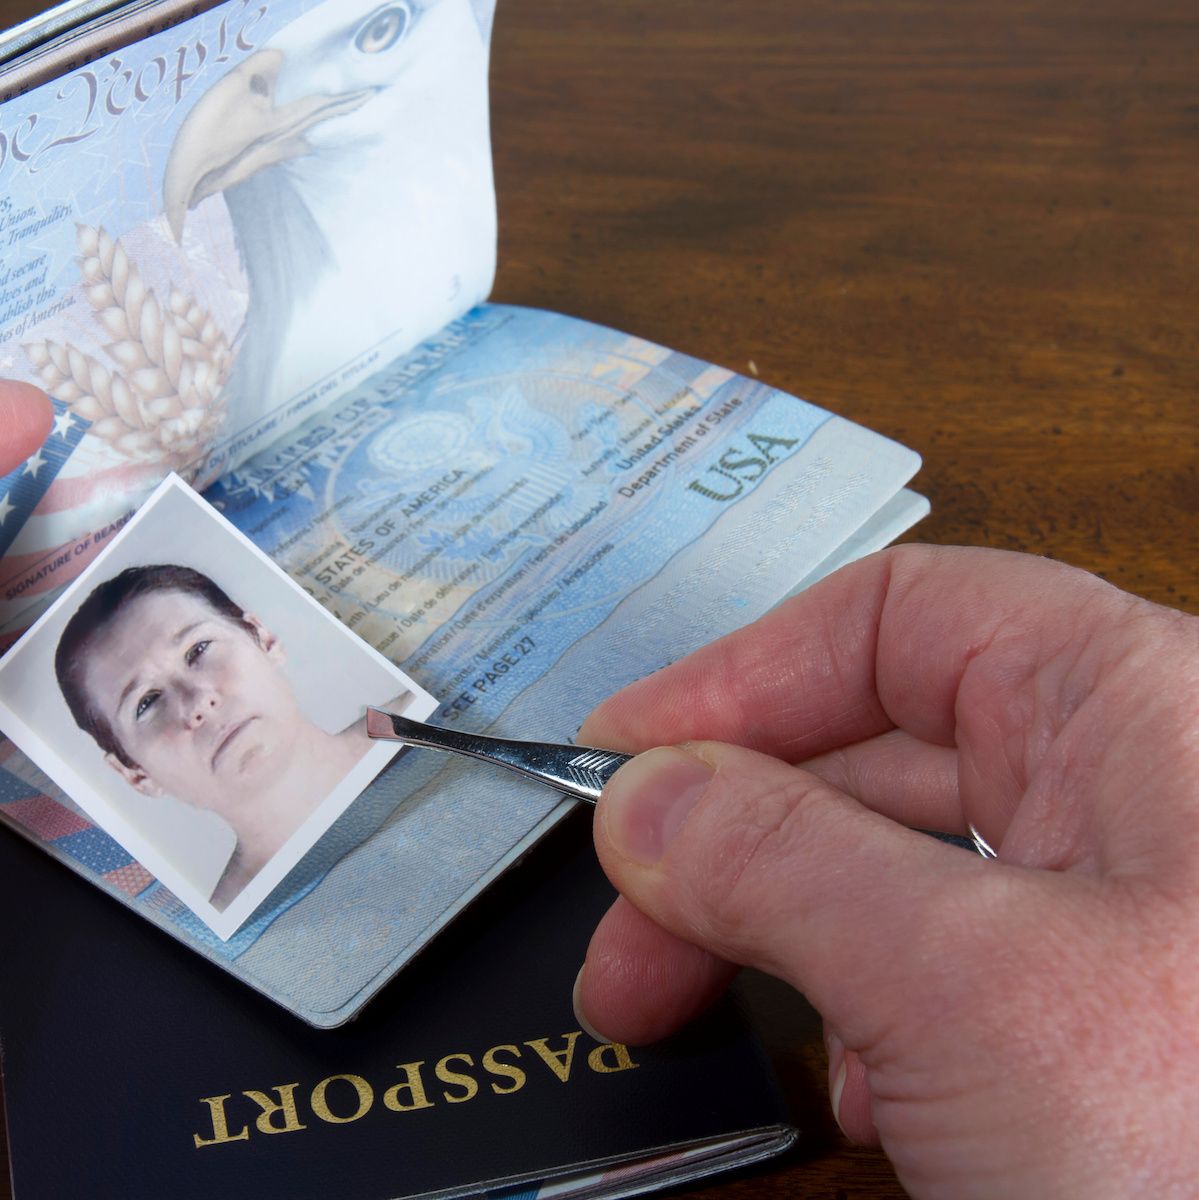 A close-up of a man&#x27;s hands fording a US passport, which can be a type of synthetic identity theft.